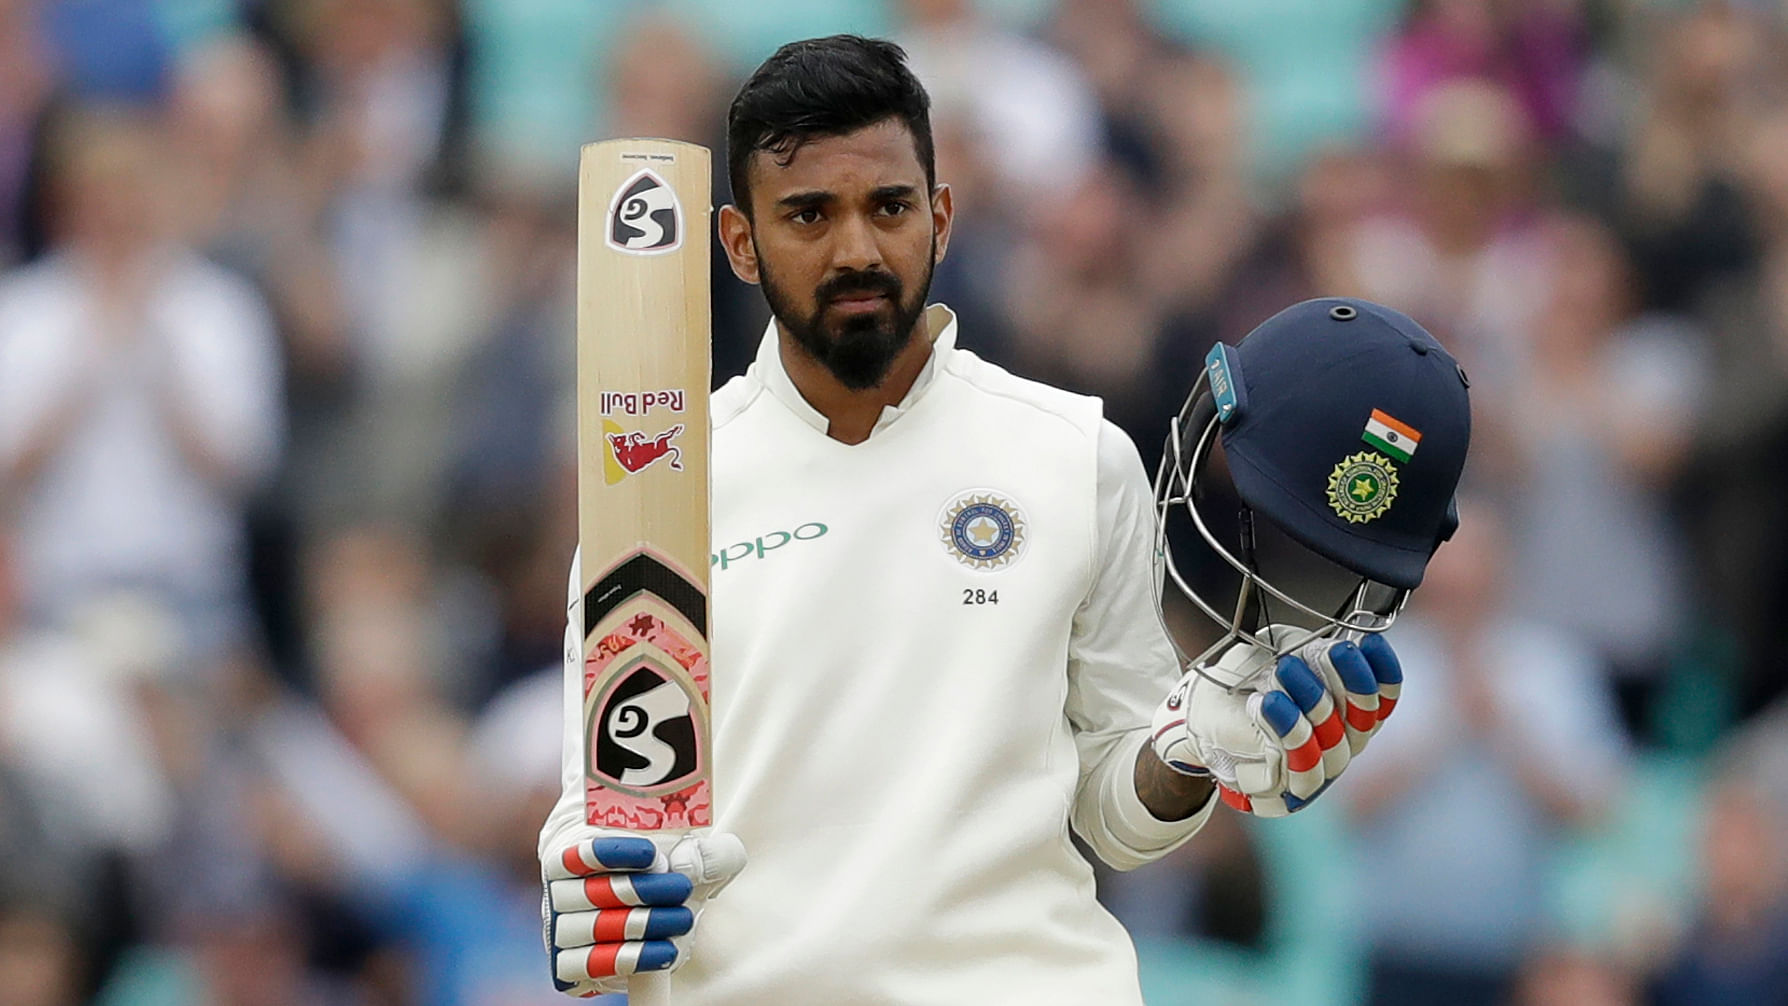 Does KL Rahul deserve to be handed the same suspension by the BCCI as Hardik Pandya?